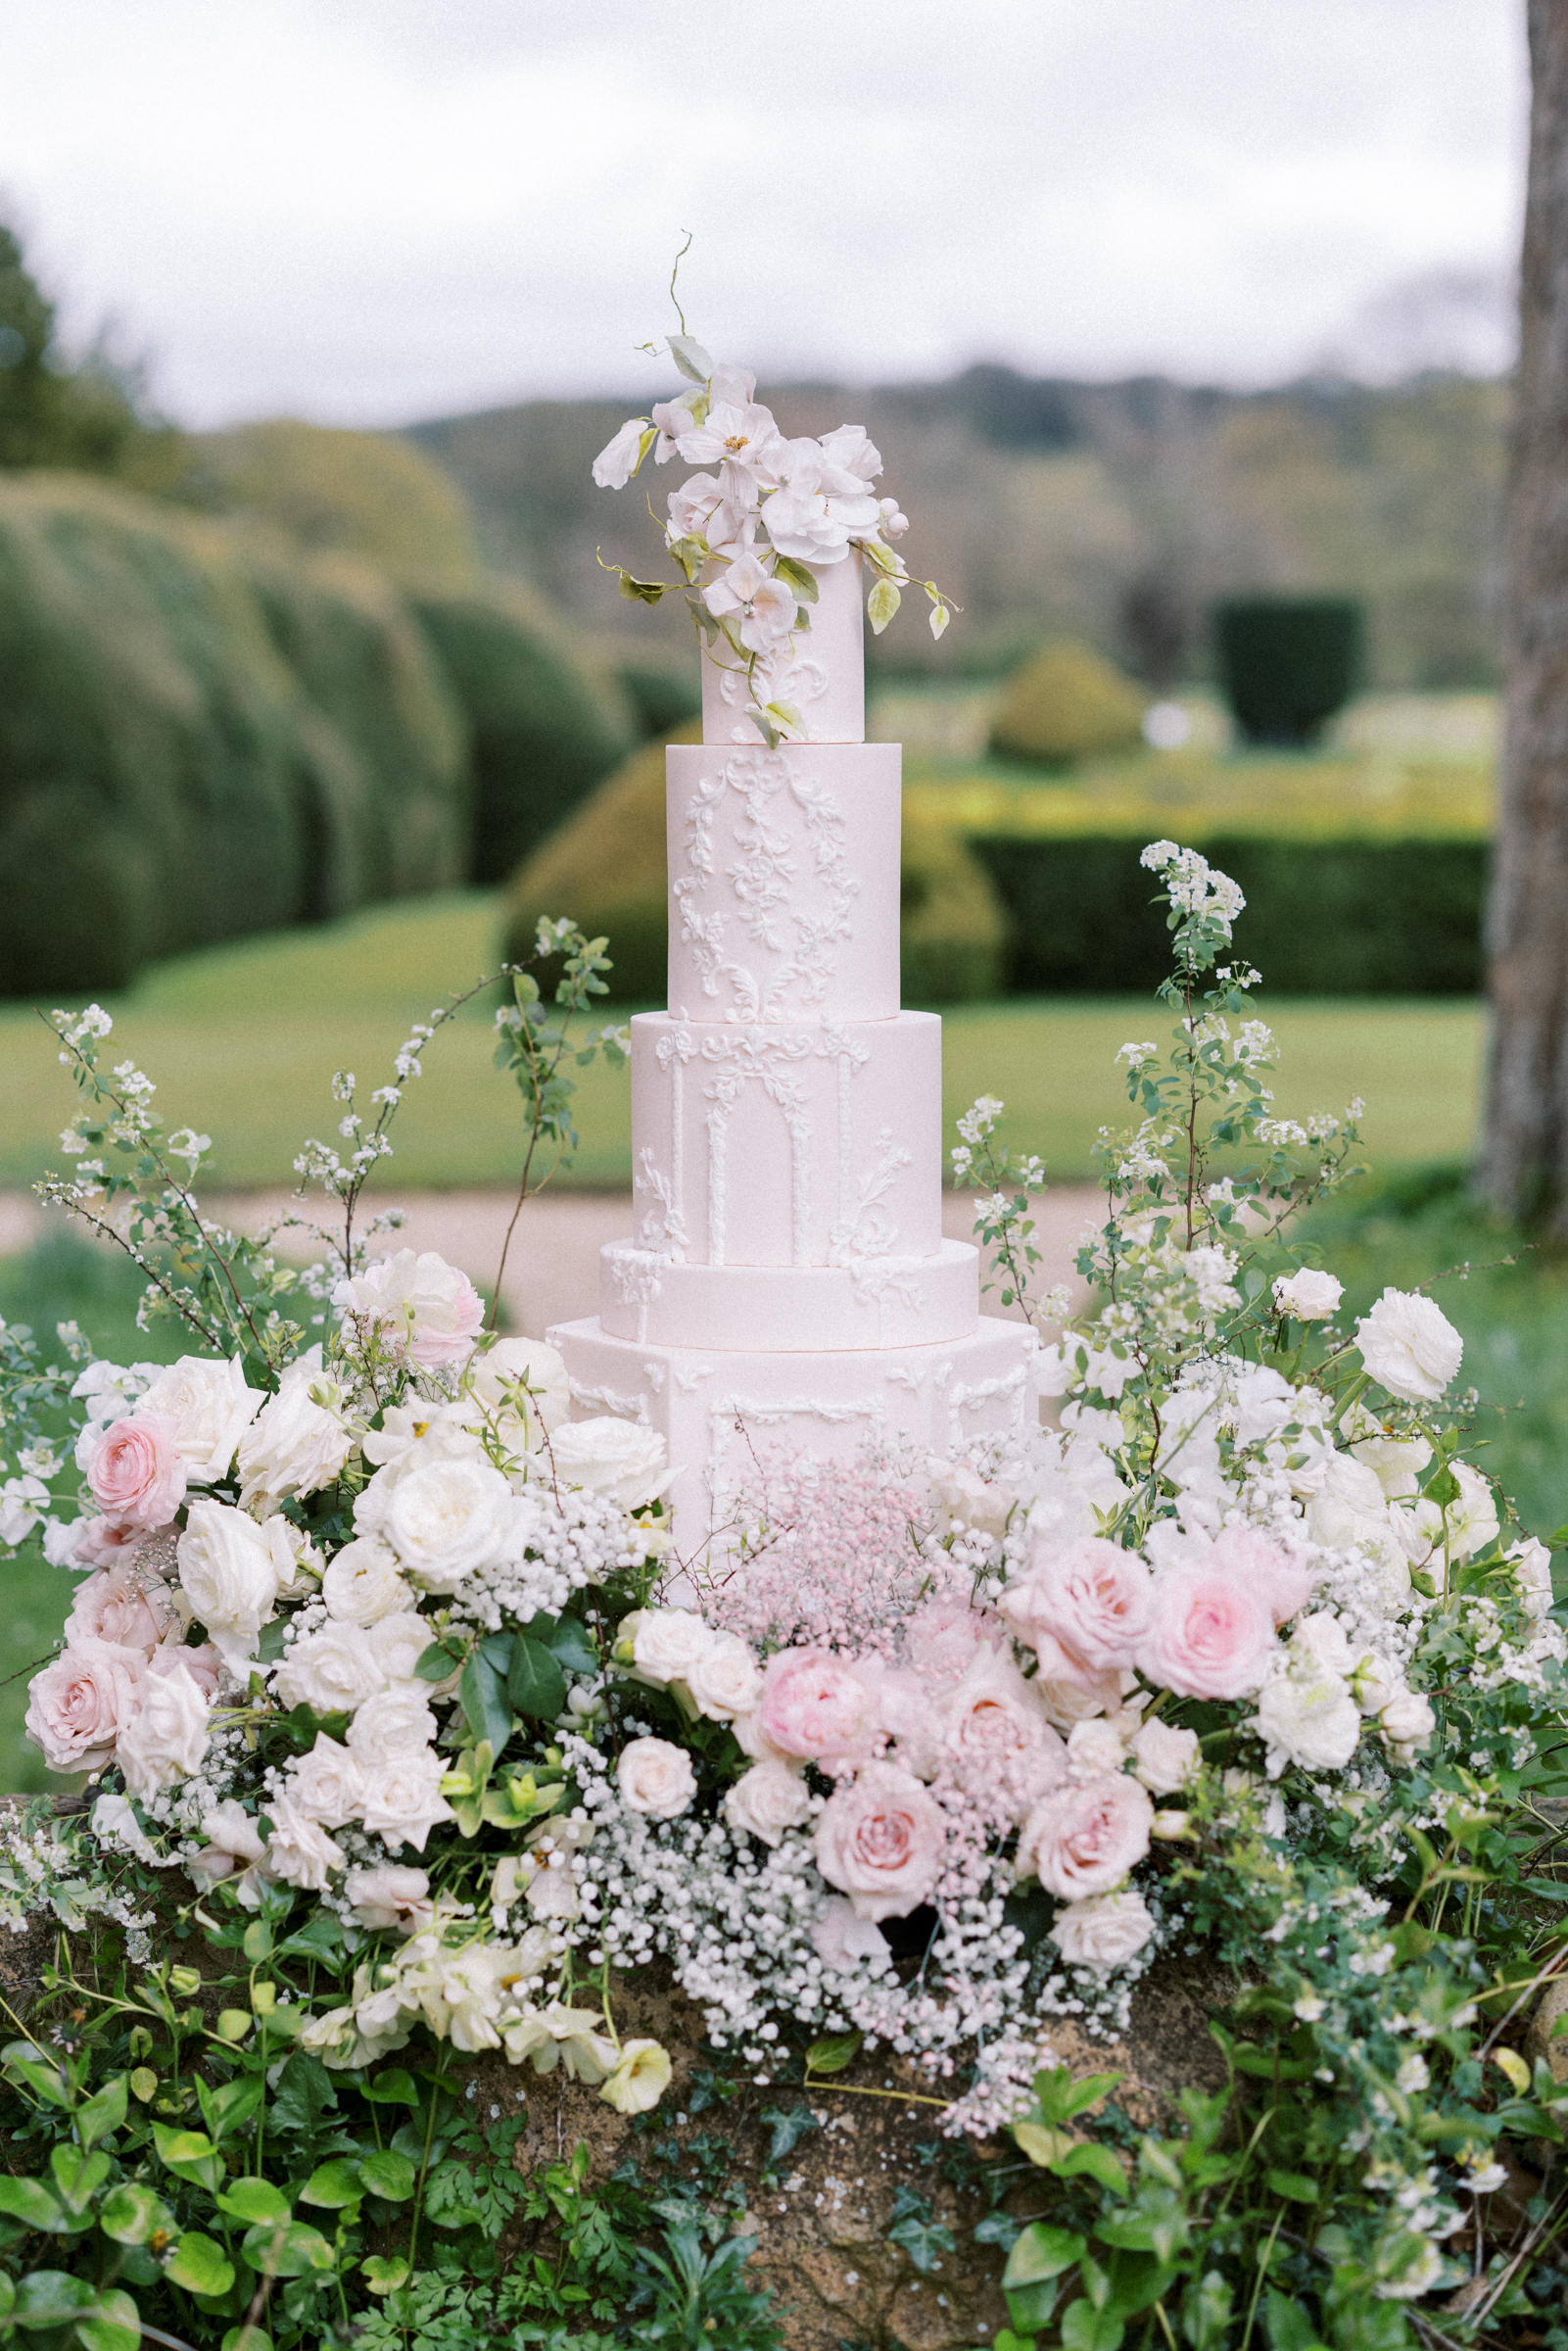 Gorgeous White and Pink wedding cake tower at luxury Sudeley Castle Wedding in the Cotswolds